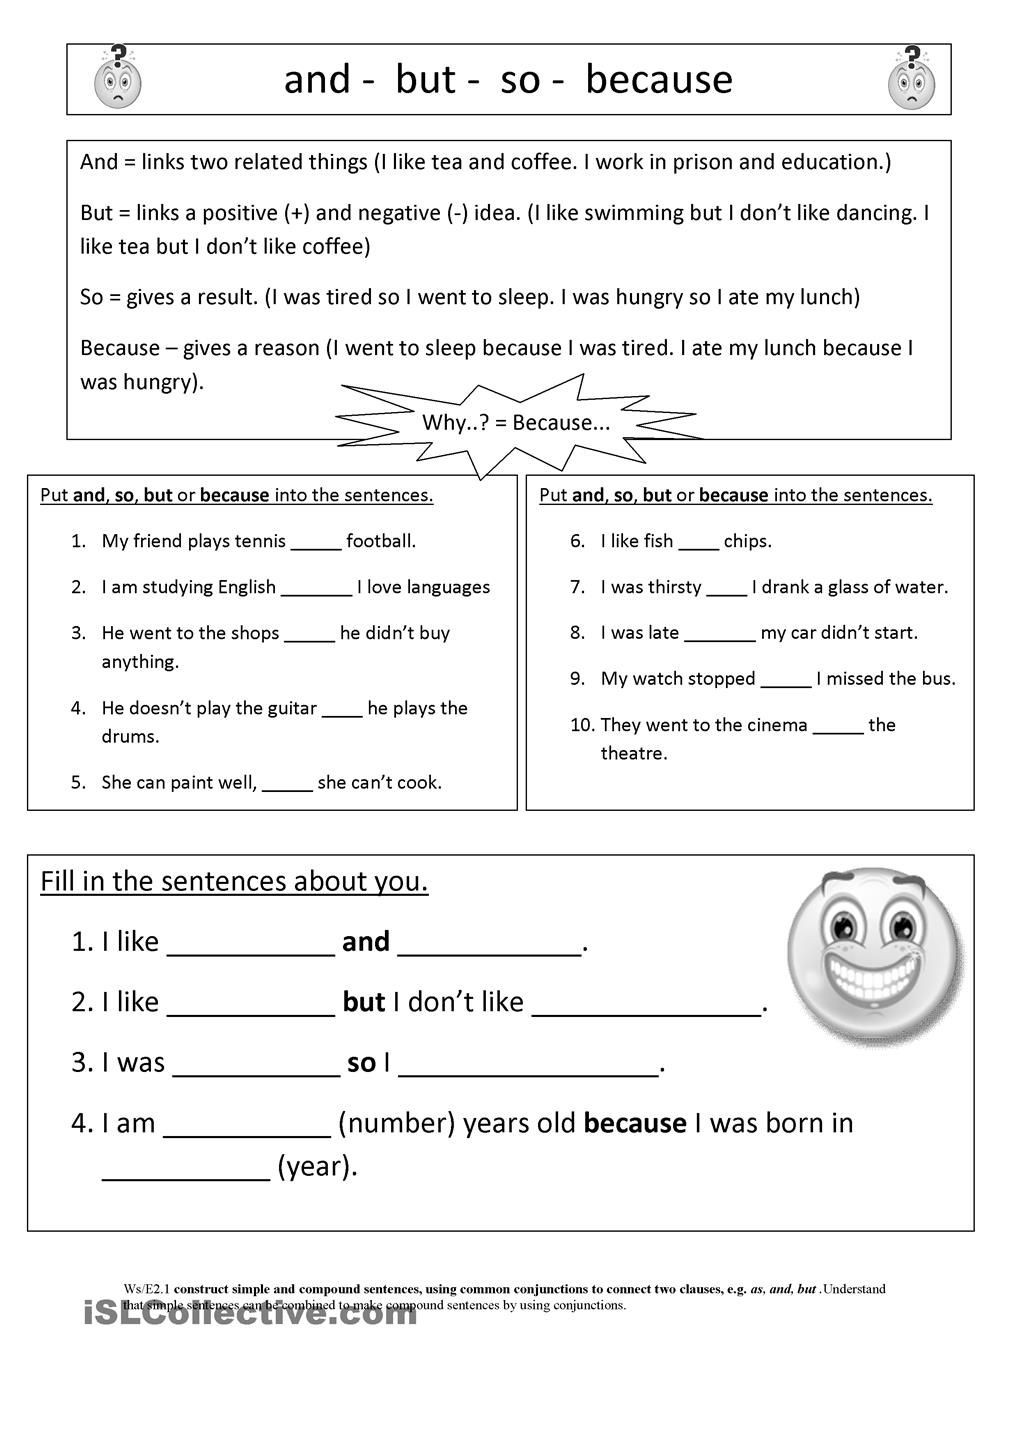 Conjunction Worksheets 6th Grade and so but because